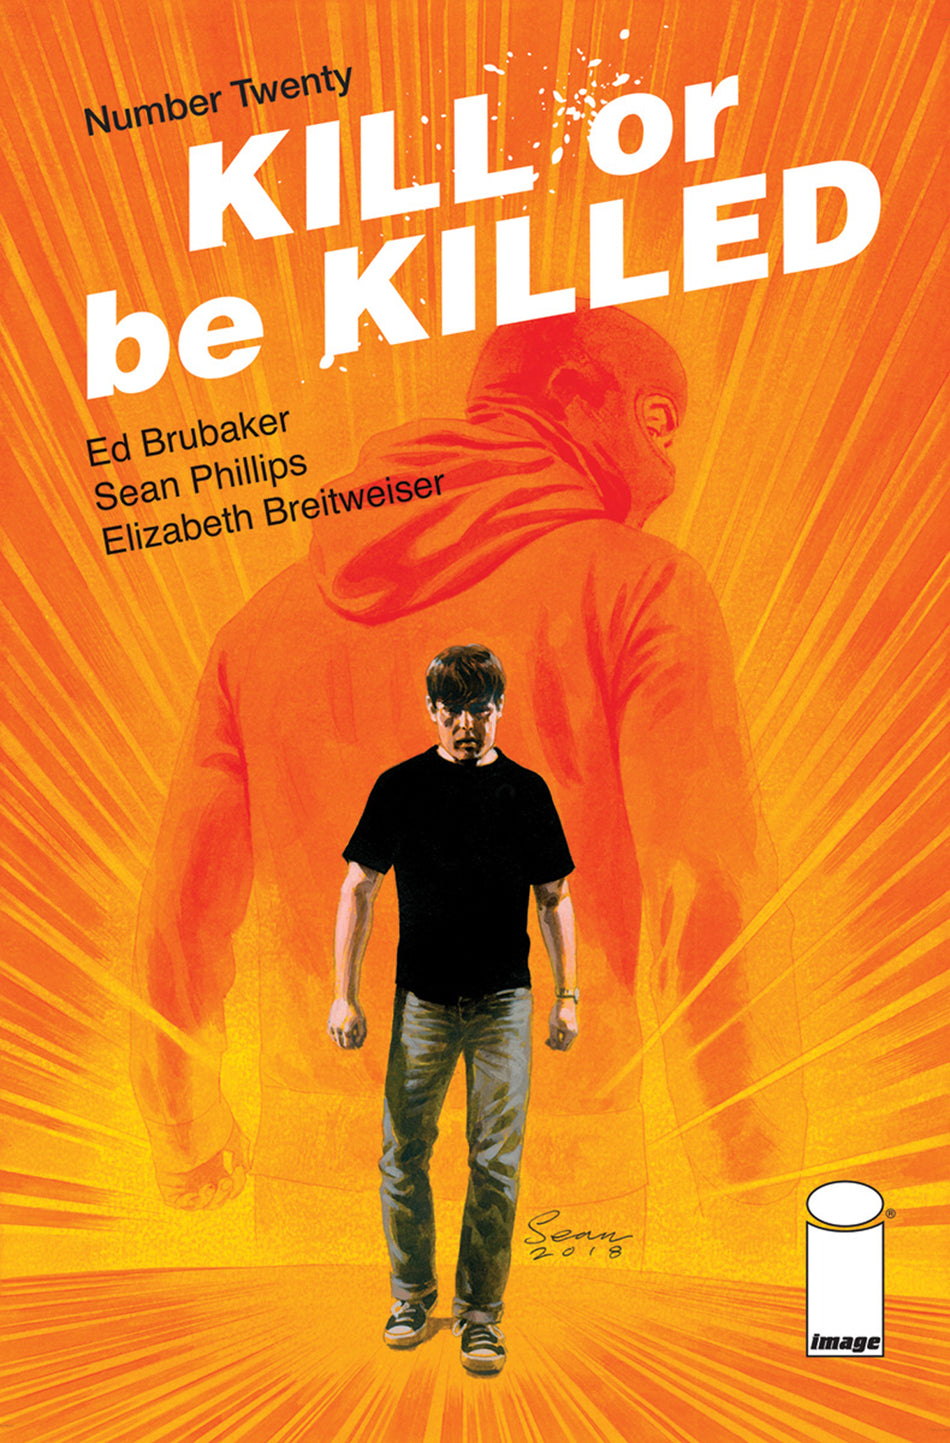 Photo of Kill Or Be Killed Issue 20 CVR A Phillips comic sold by Stronghold Collectibles